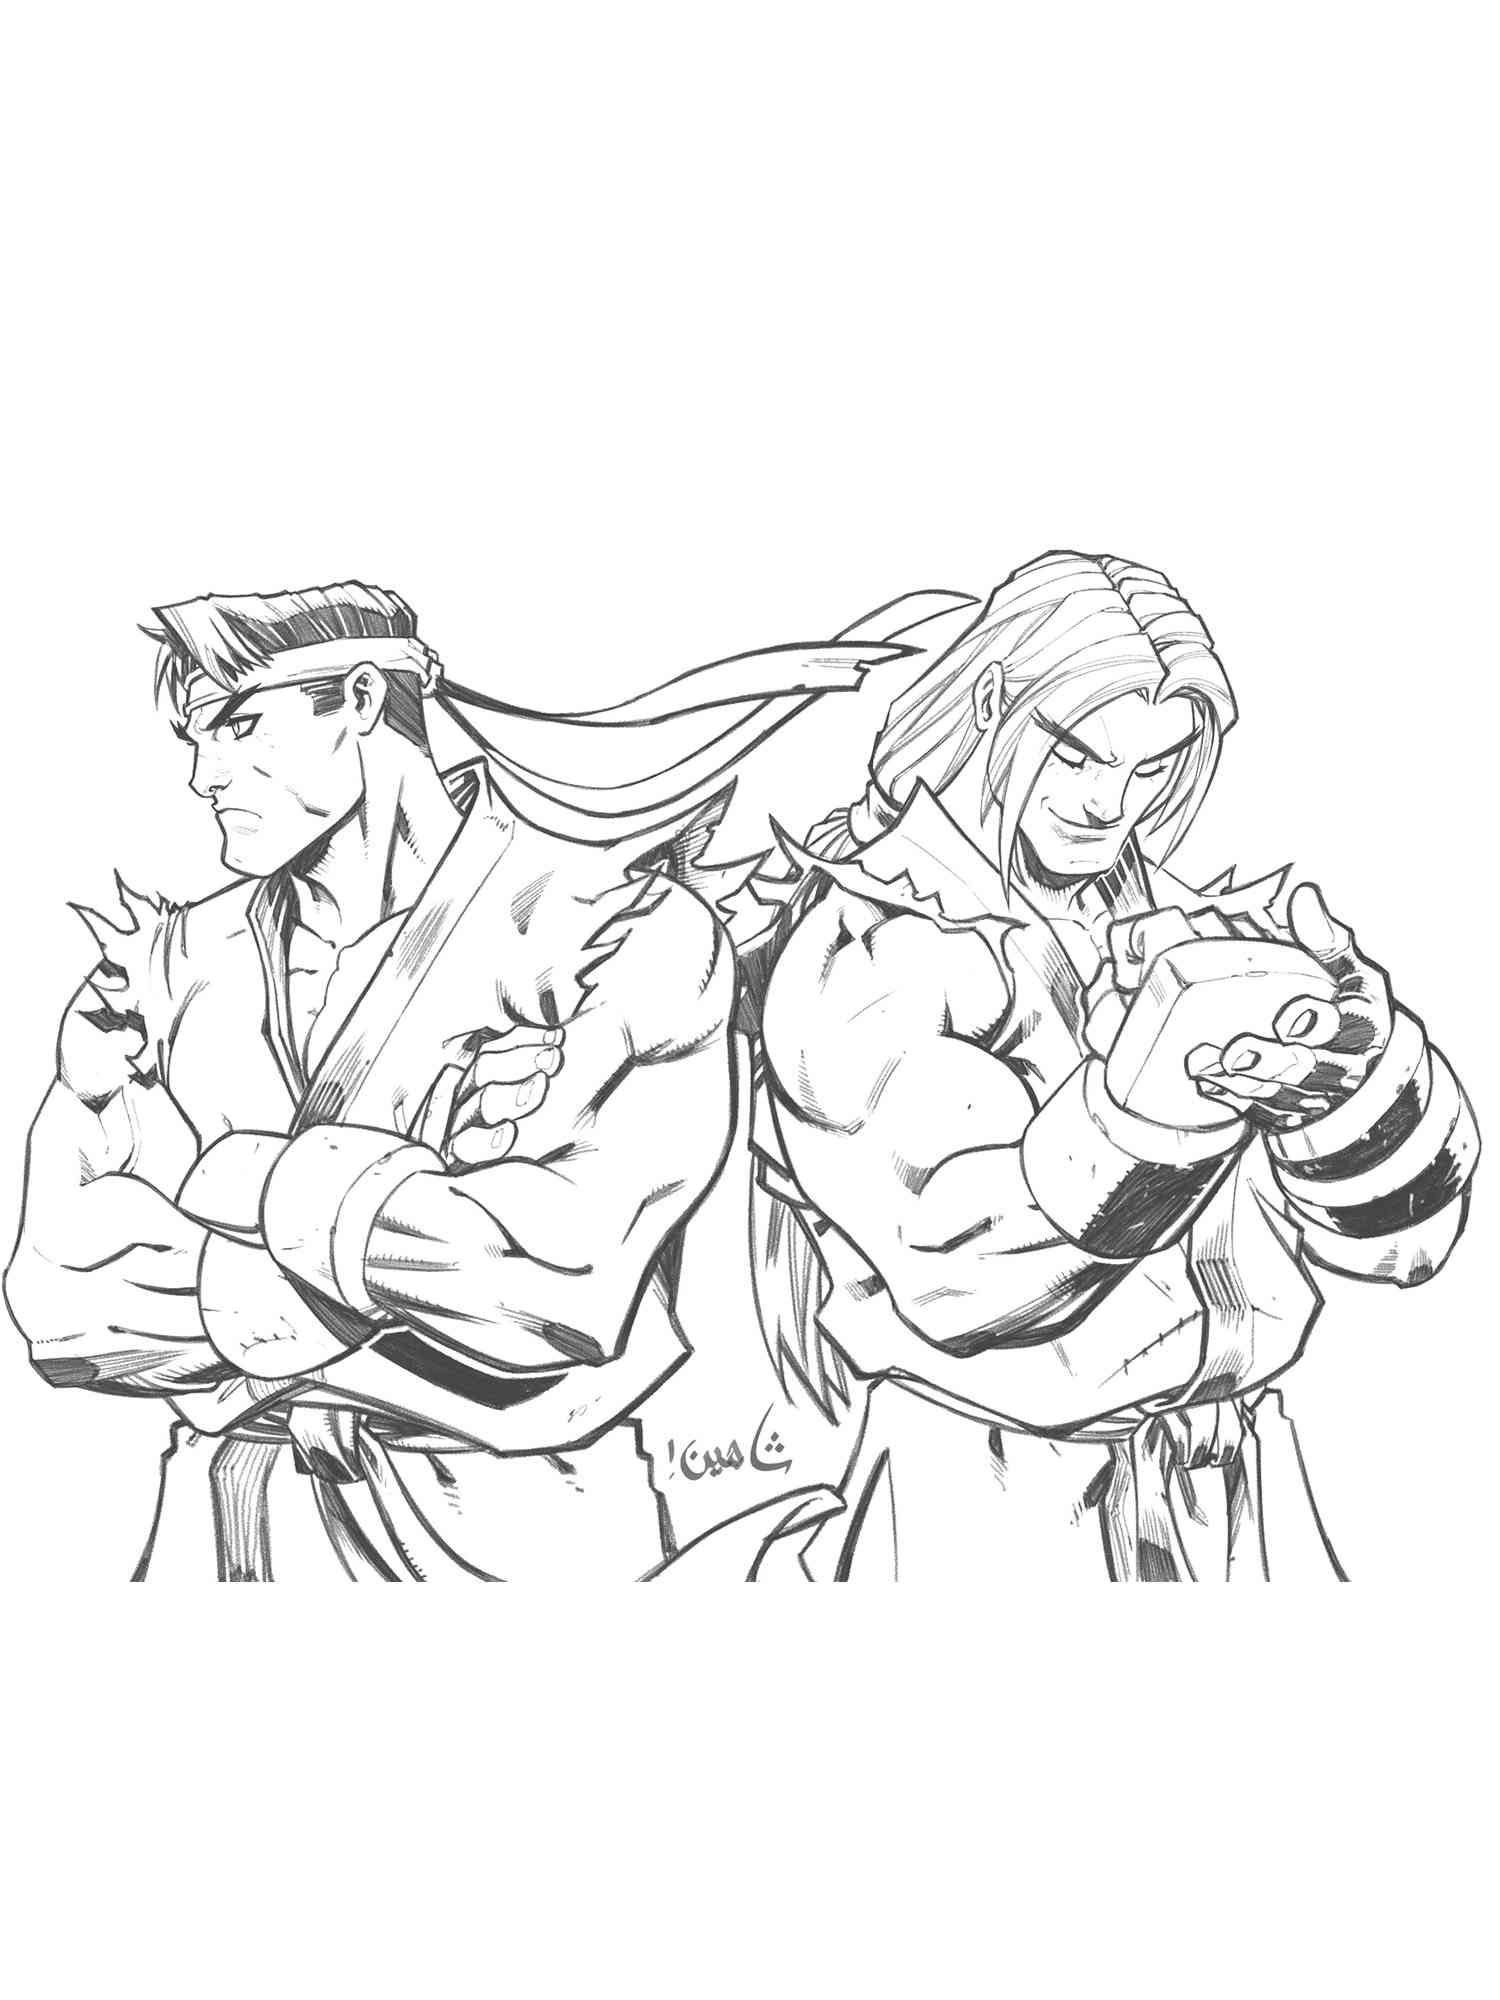 Ryu and Ken Street Fighter coloring page